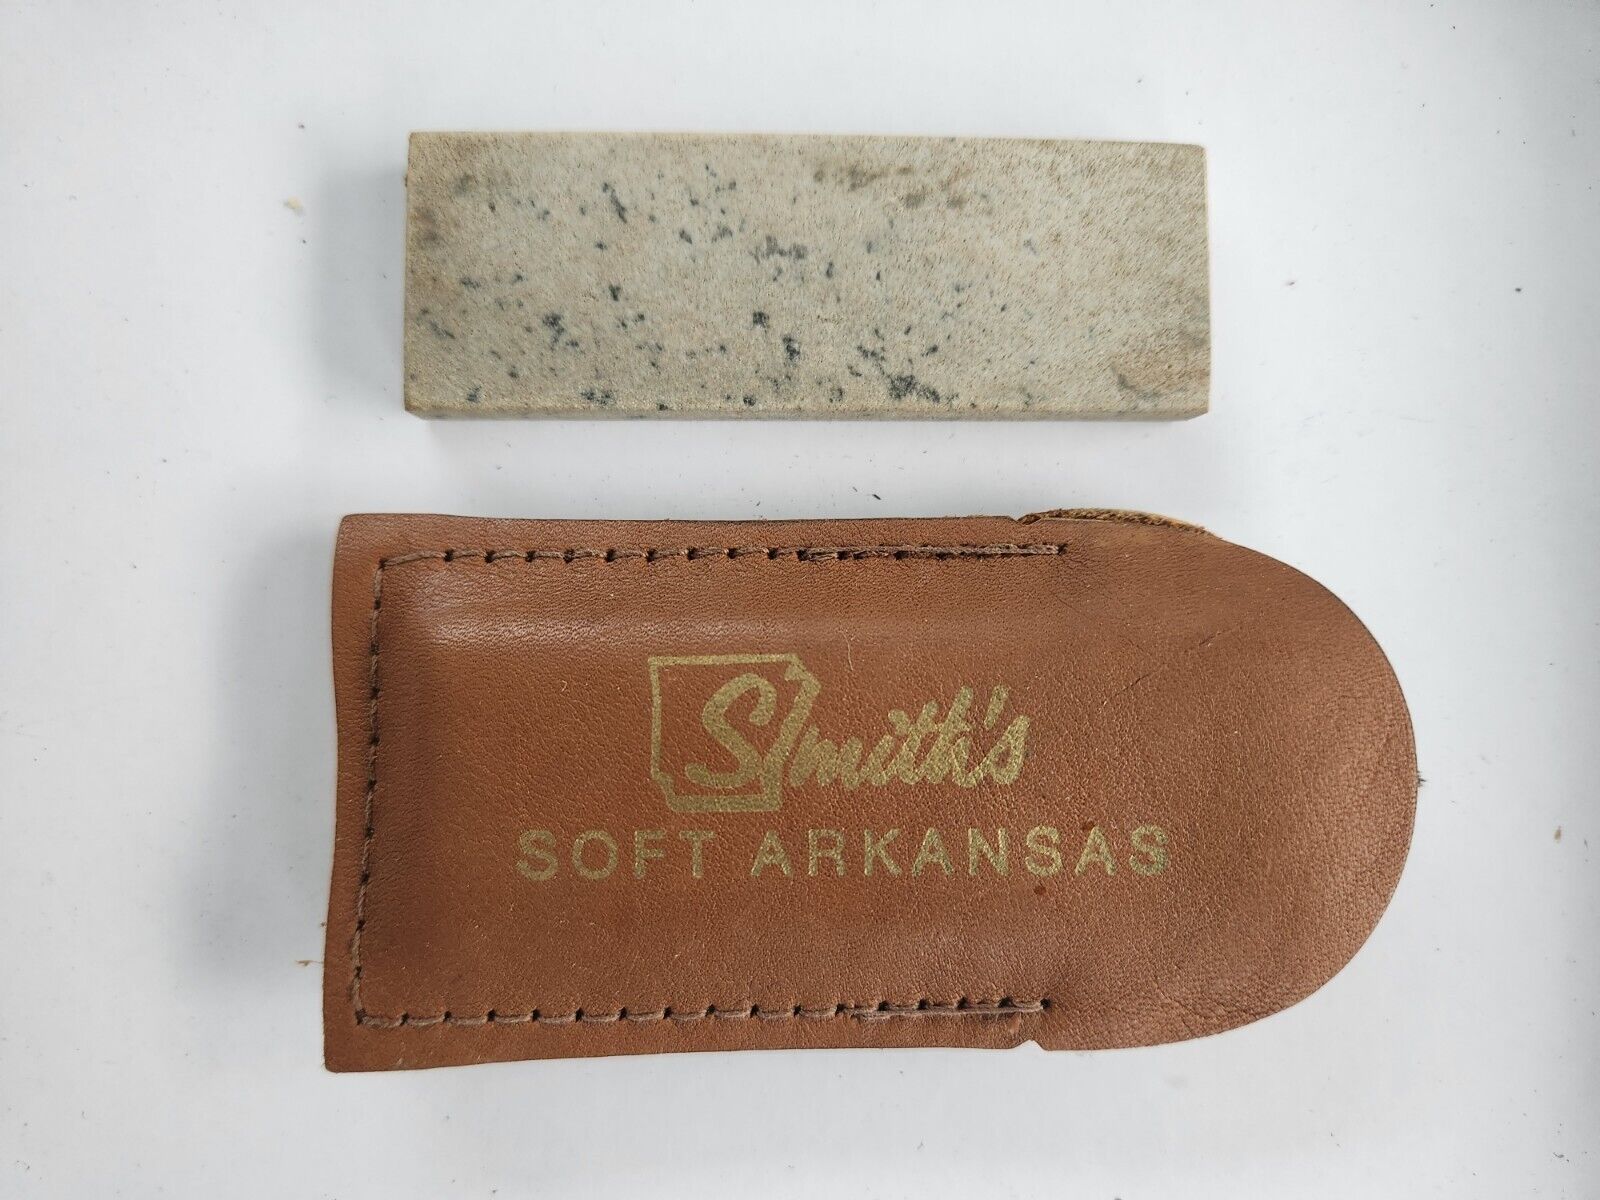 Vintage Smiths Soft Arkansas Oilstone in leather pouch